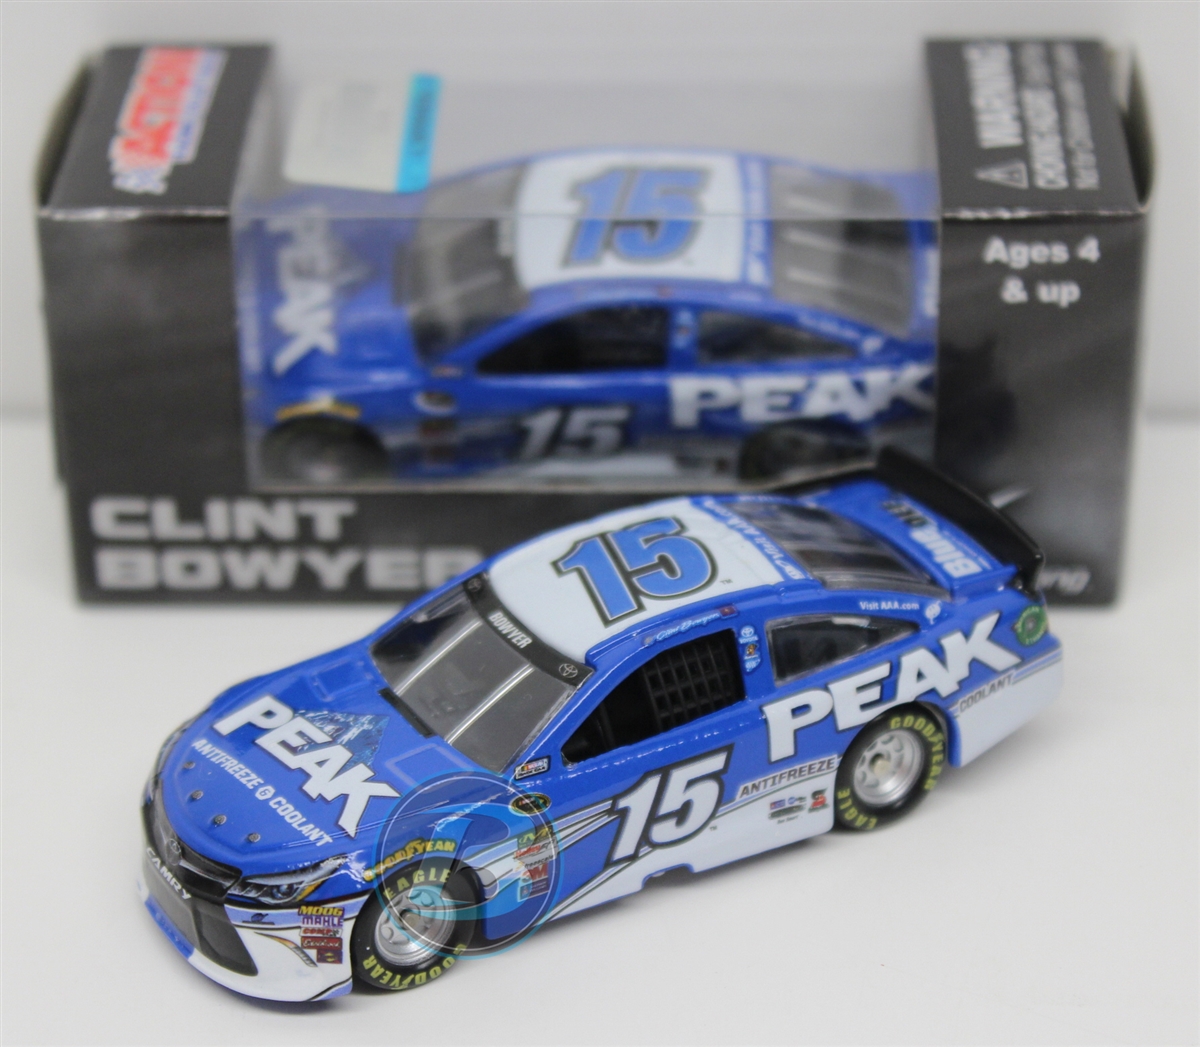 2014 LIONEL RACING #14 Chevy SS 1:64 Action Diecast In Stock Free Shipping 